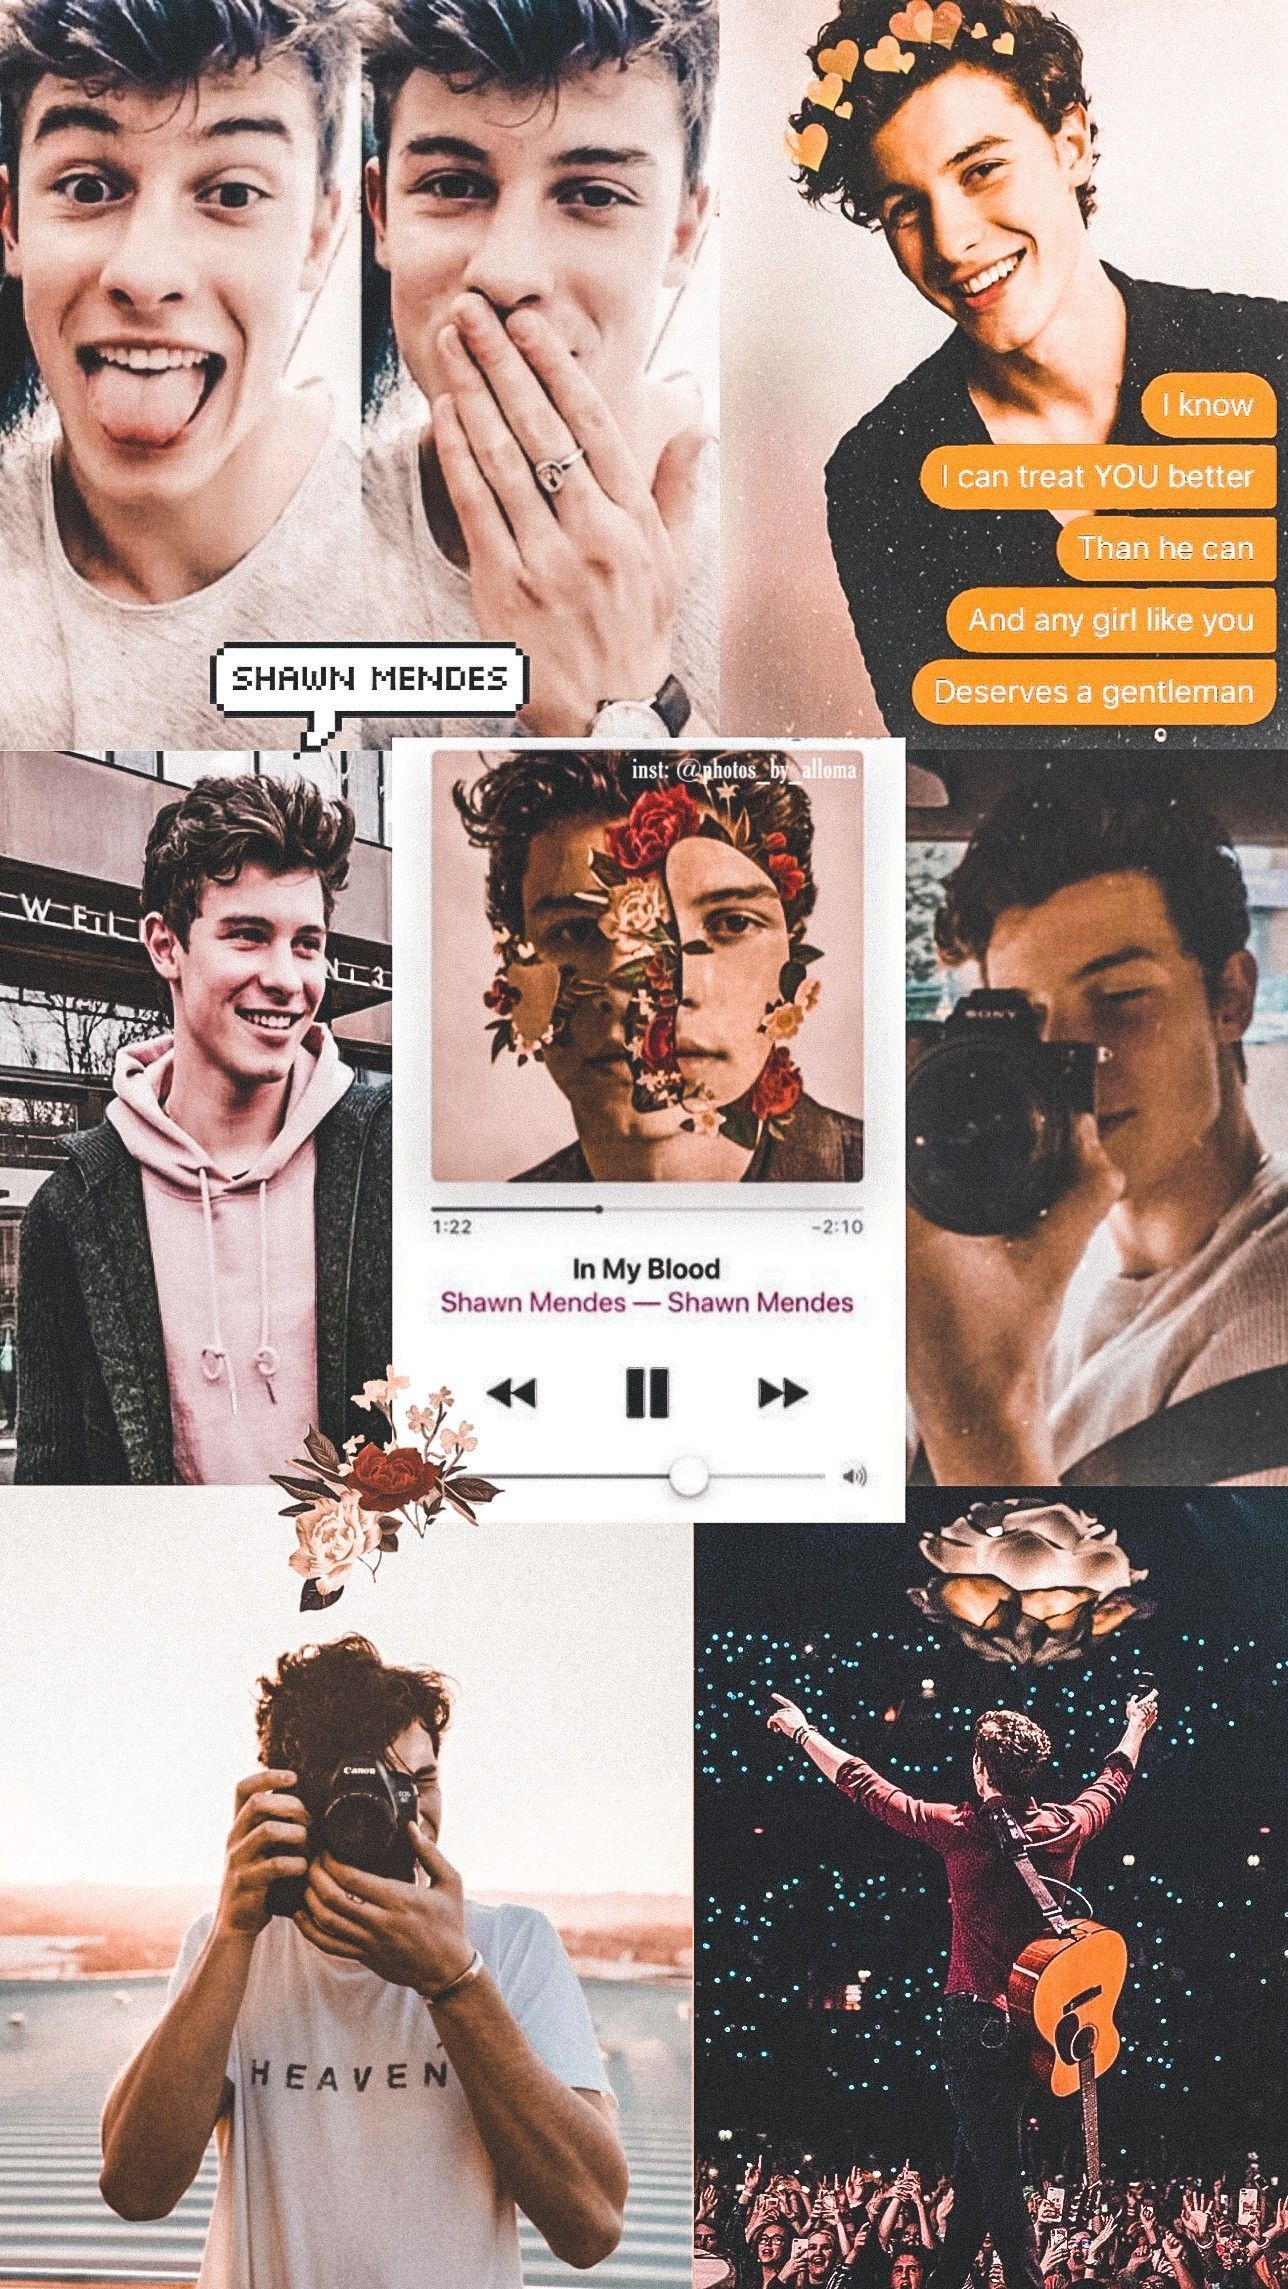 Shawn mendes collage wallpaper. Shawn mendes wallpaper, Foto shawn mendes, Shawn mendes cute